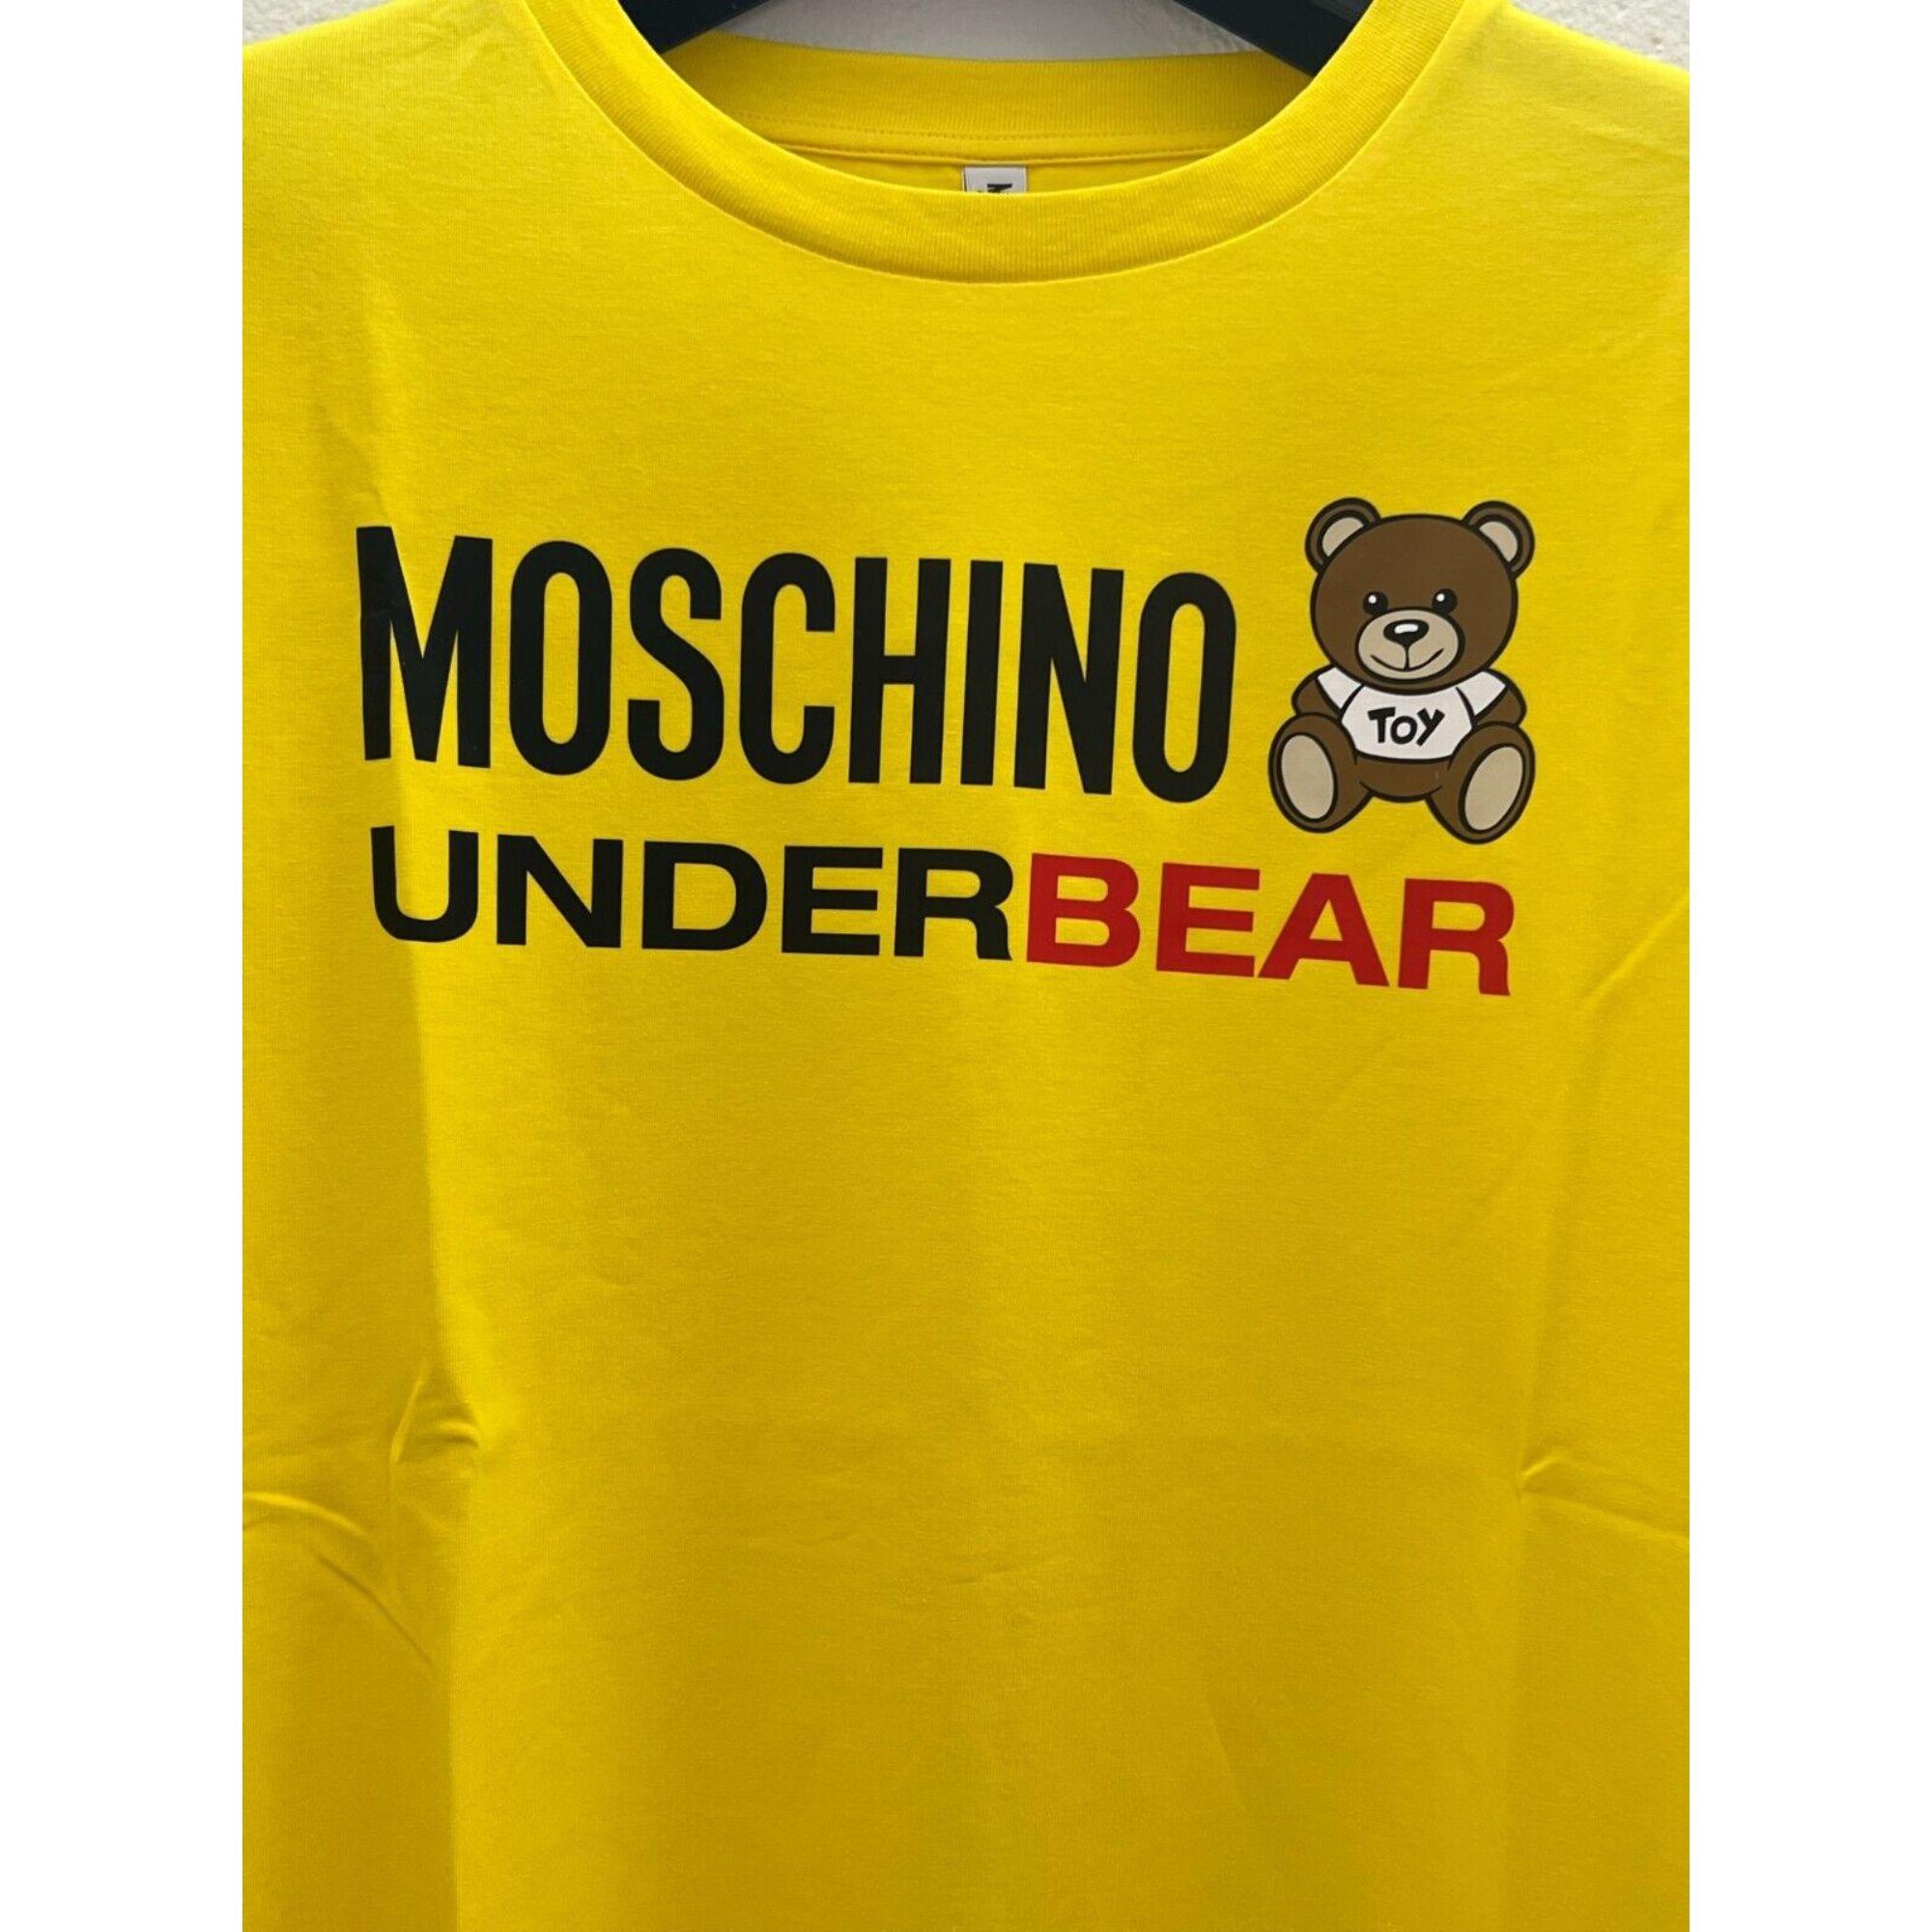 AW20 Moschino Underwear Jeremy Scott Yellow Underbear Teddy Bear Cotton T-shirt

Additional Information:
Material: 94% Cotton, 6% EA
Color: Yellow, White, Brown, Red
Size: M / US S
Style: Basic
Pattern: Solid, Logo
Dimensions: Shoulder to shoulder